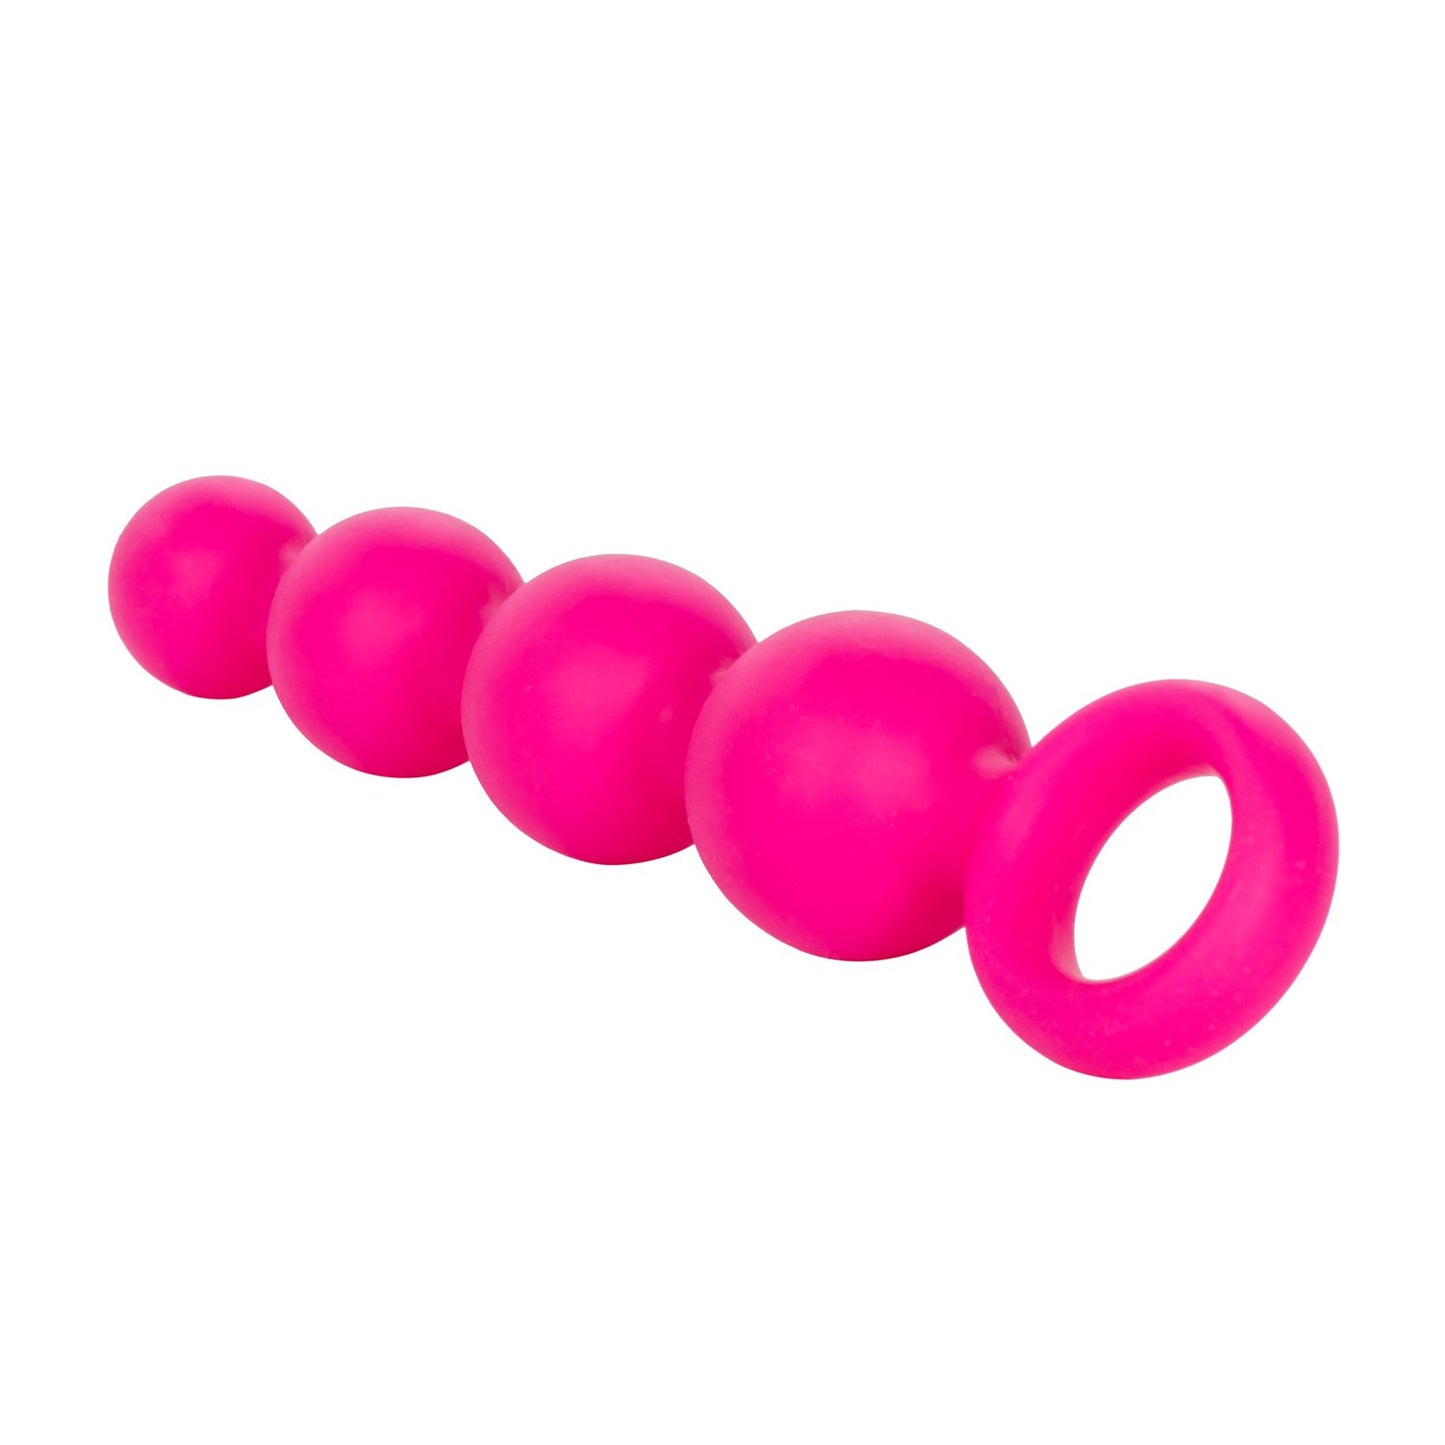 Silicone Booty Beads